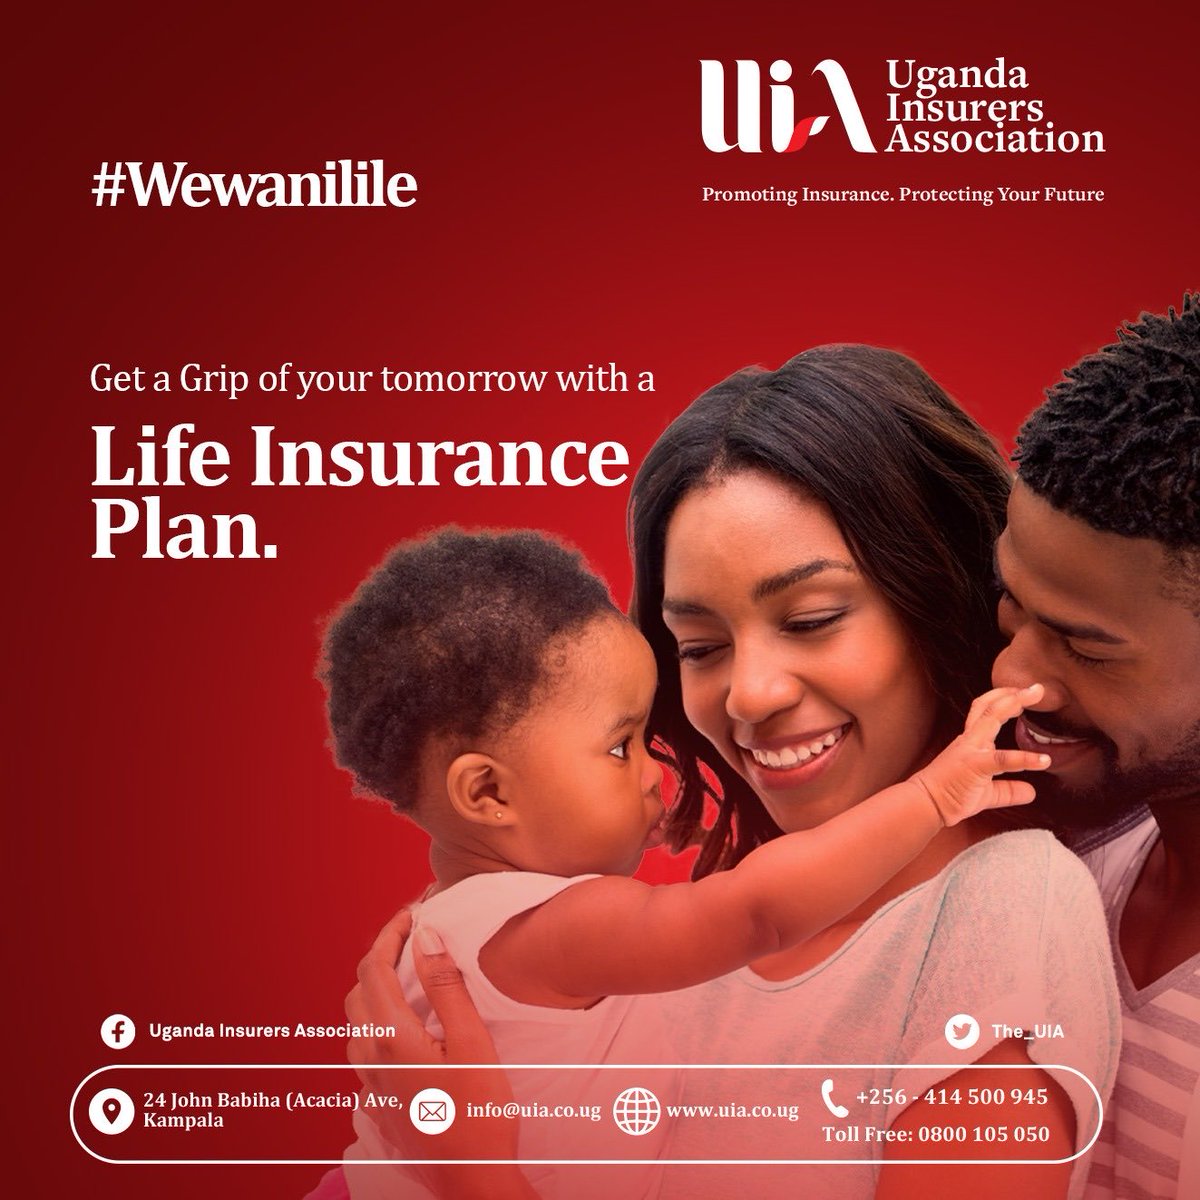 #Wewanilile 

Your tomorrow matters! Take a firm grip with a Life Insurance Plan.

It provides financial security & helps to pay any medical or final expenses.

#UIA #GetAGrip #Lifeinsurance #BBTitans  #BBTitians #insurancepolicy #saveforthefuture #insurance